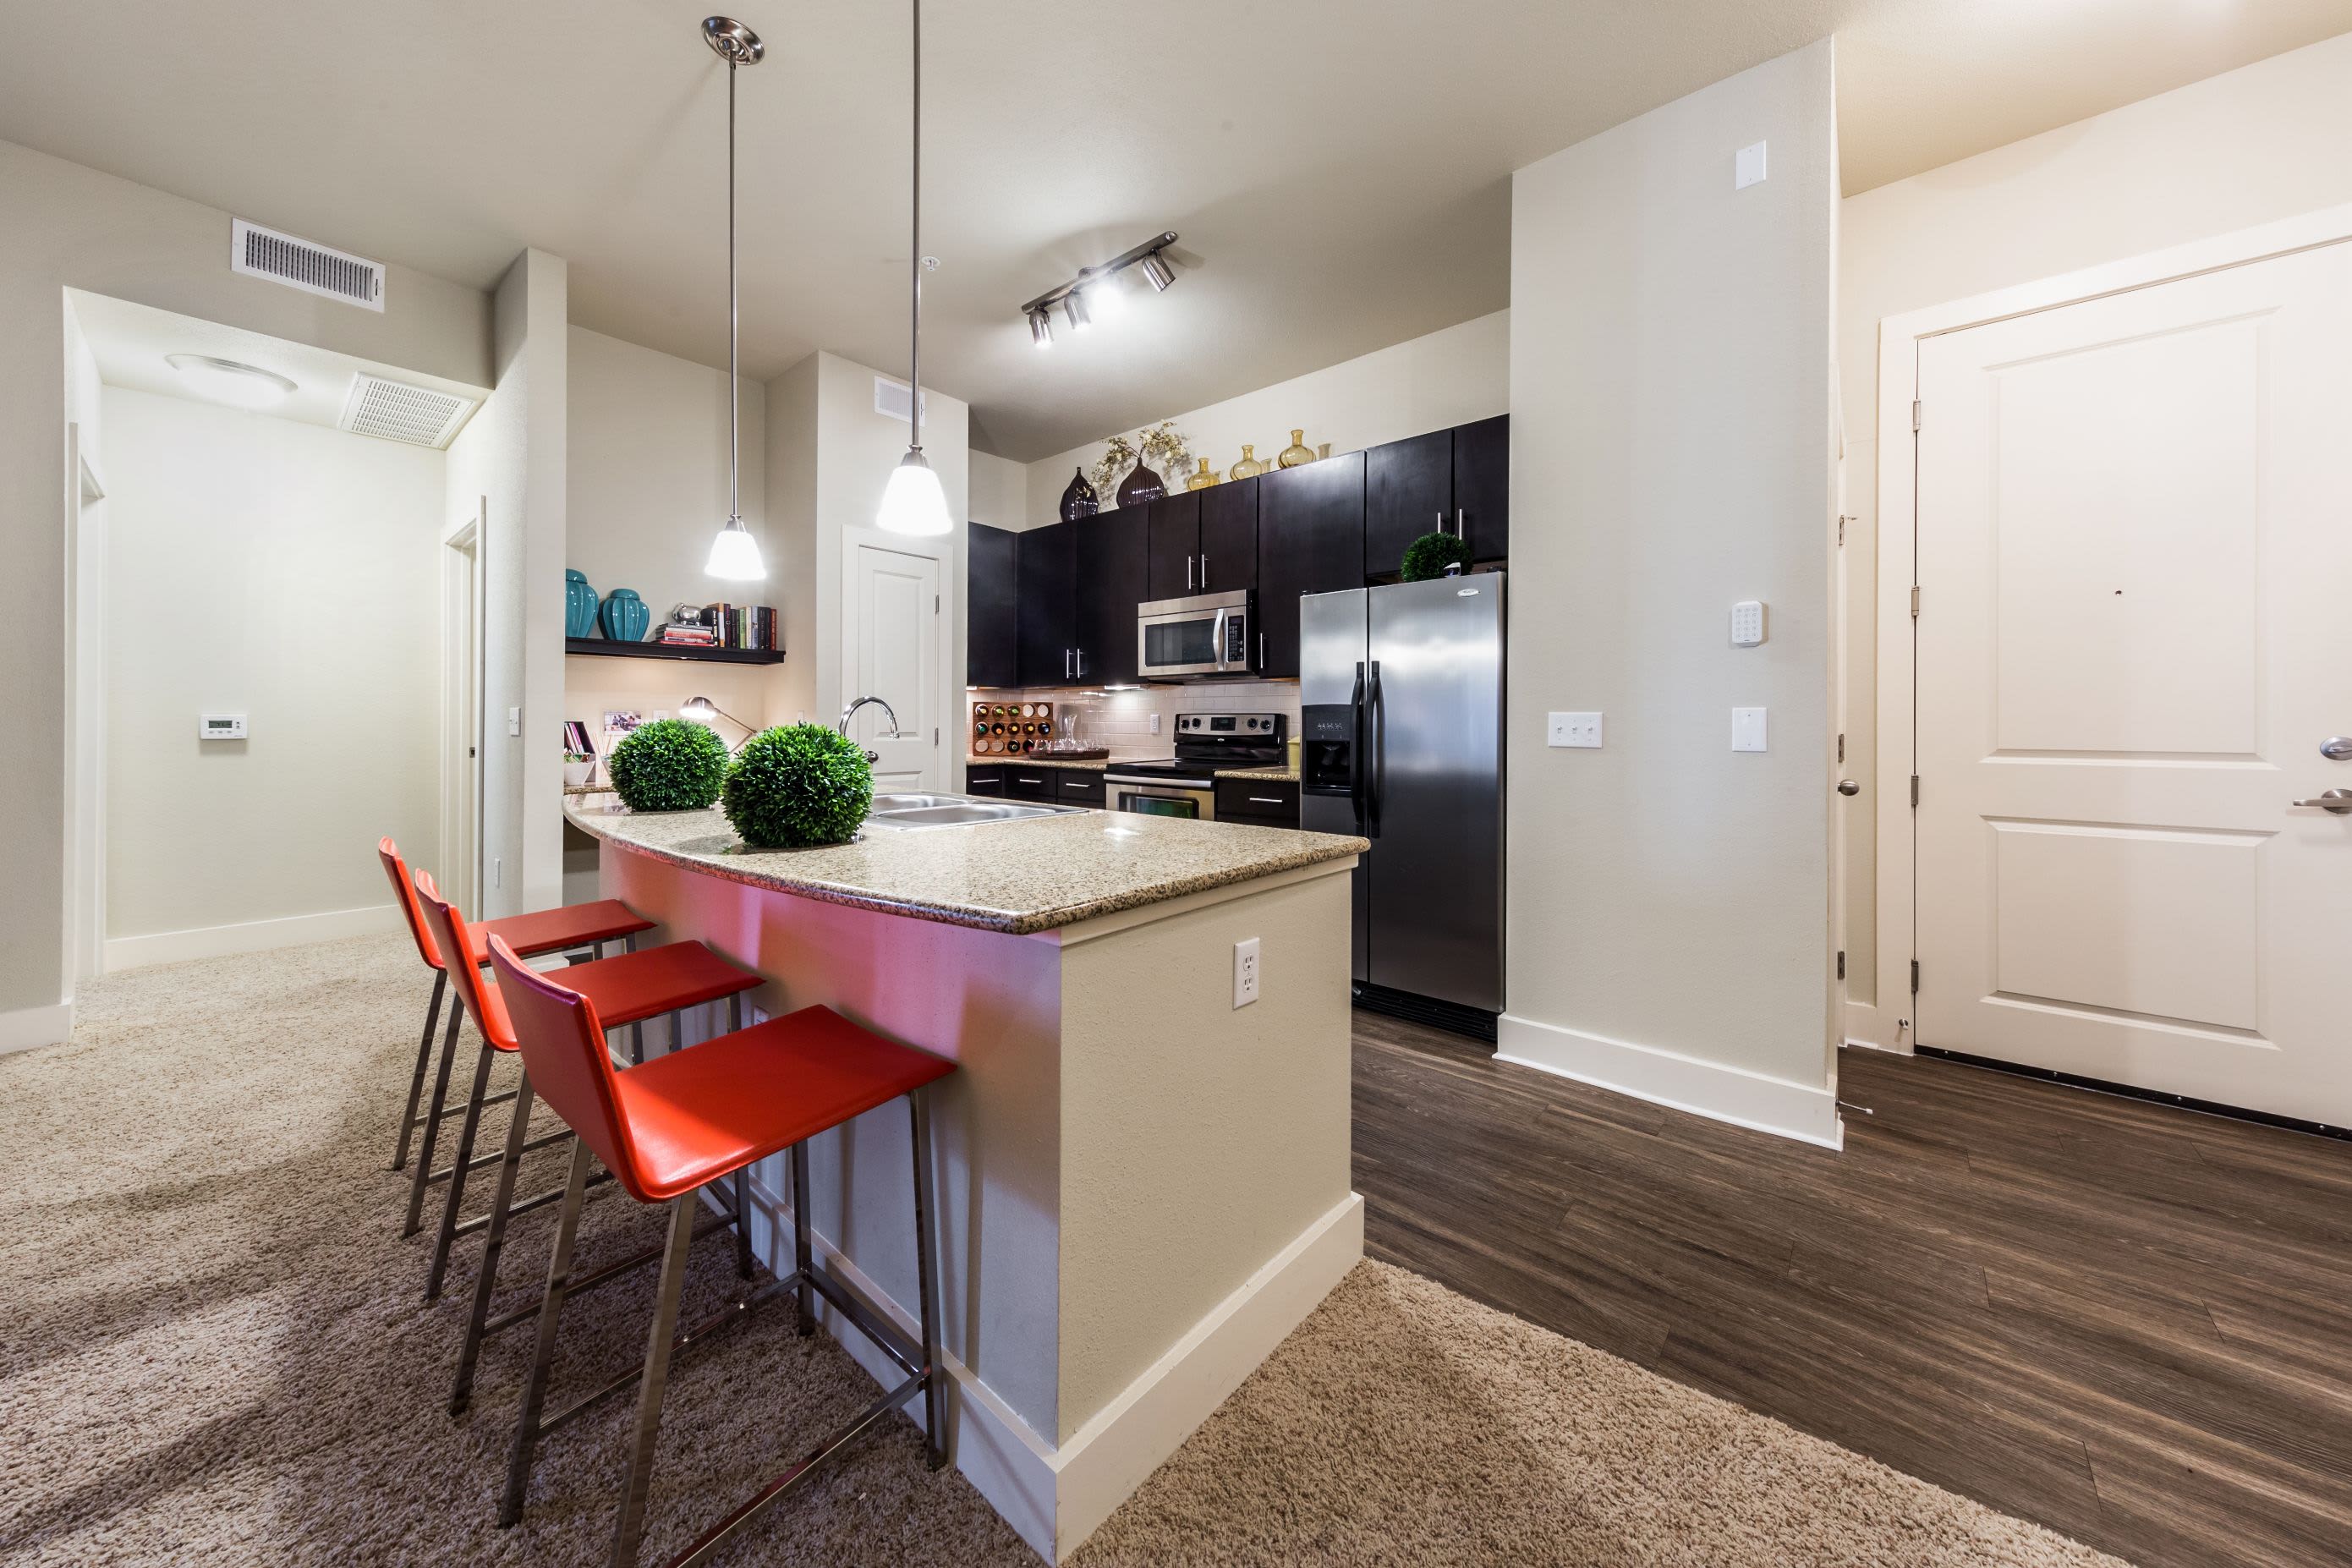 Modern kitchen with a breakfast bar at The Marq at Ridgegate in Lone Tree, Colorado